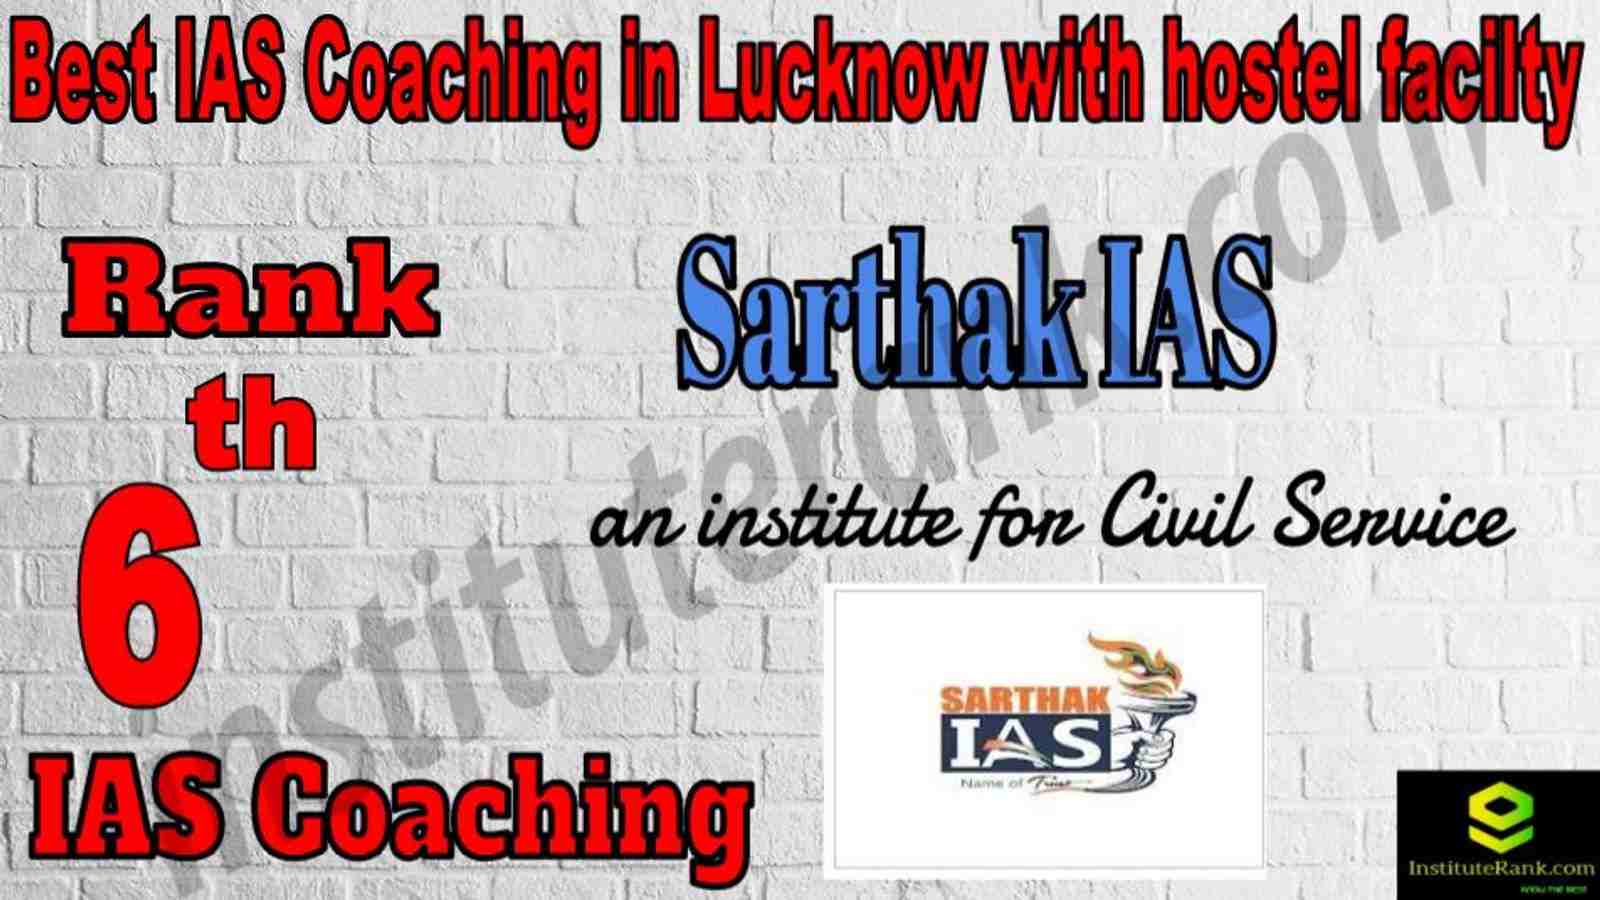 6th Best IAS Coaching in Lucknow With Hostel facility